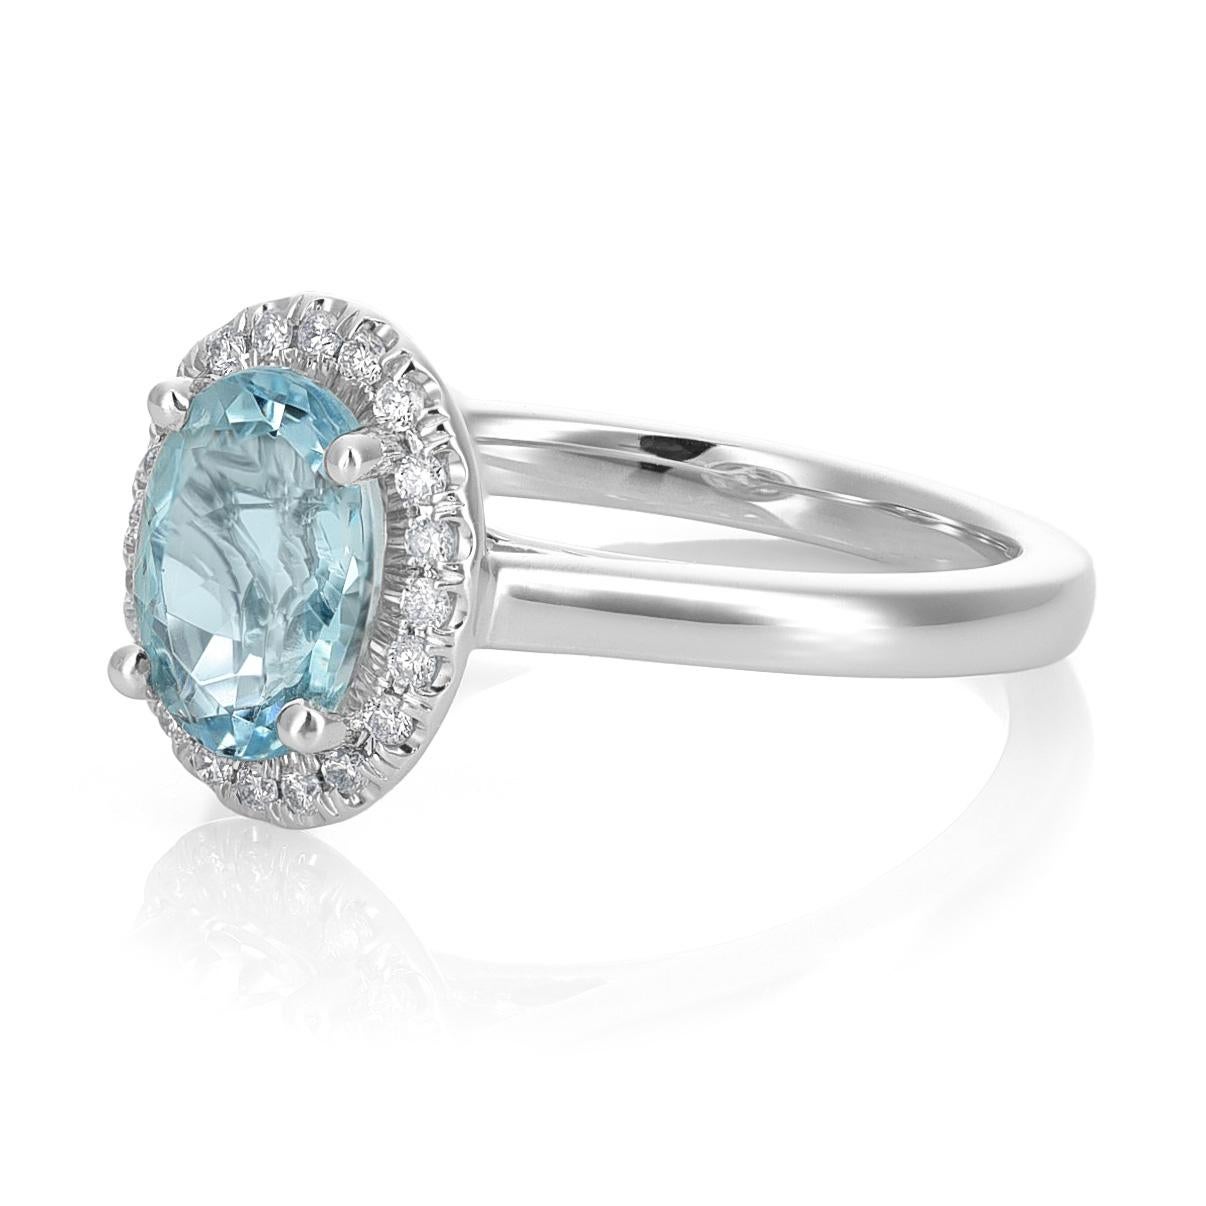 Presenting a stunning 14K White Gold Ring featuring a captivating Natural Aquamarine weighing 1.73 carats. The oval shape of the Aquamarine, gently heated to enhance its inherent beauty, adds a touch of timeless elegance to this piece. Complementing